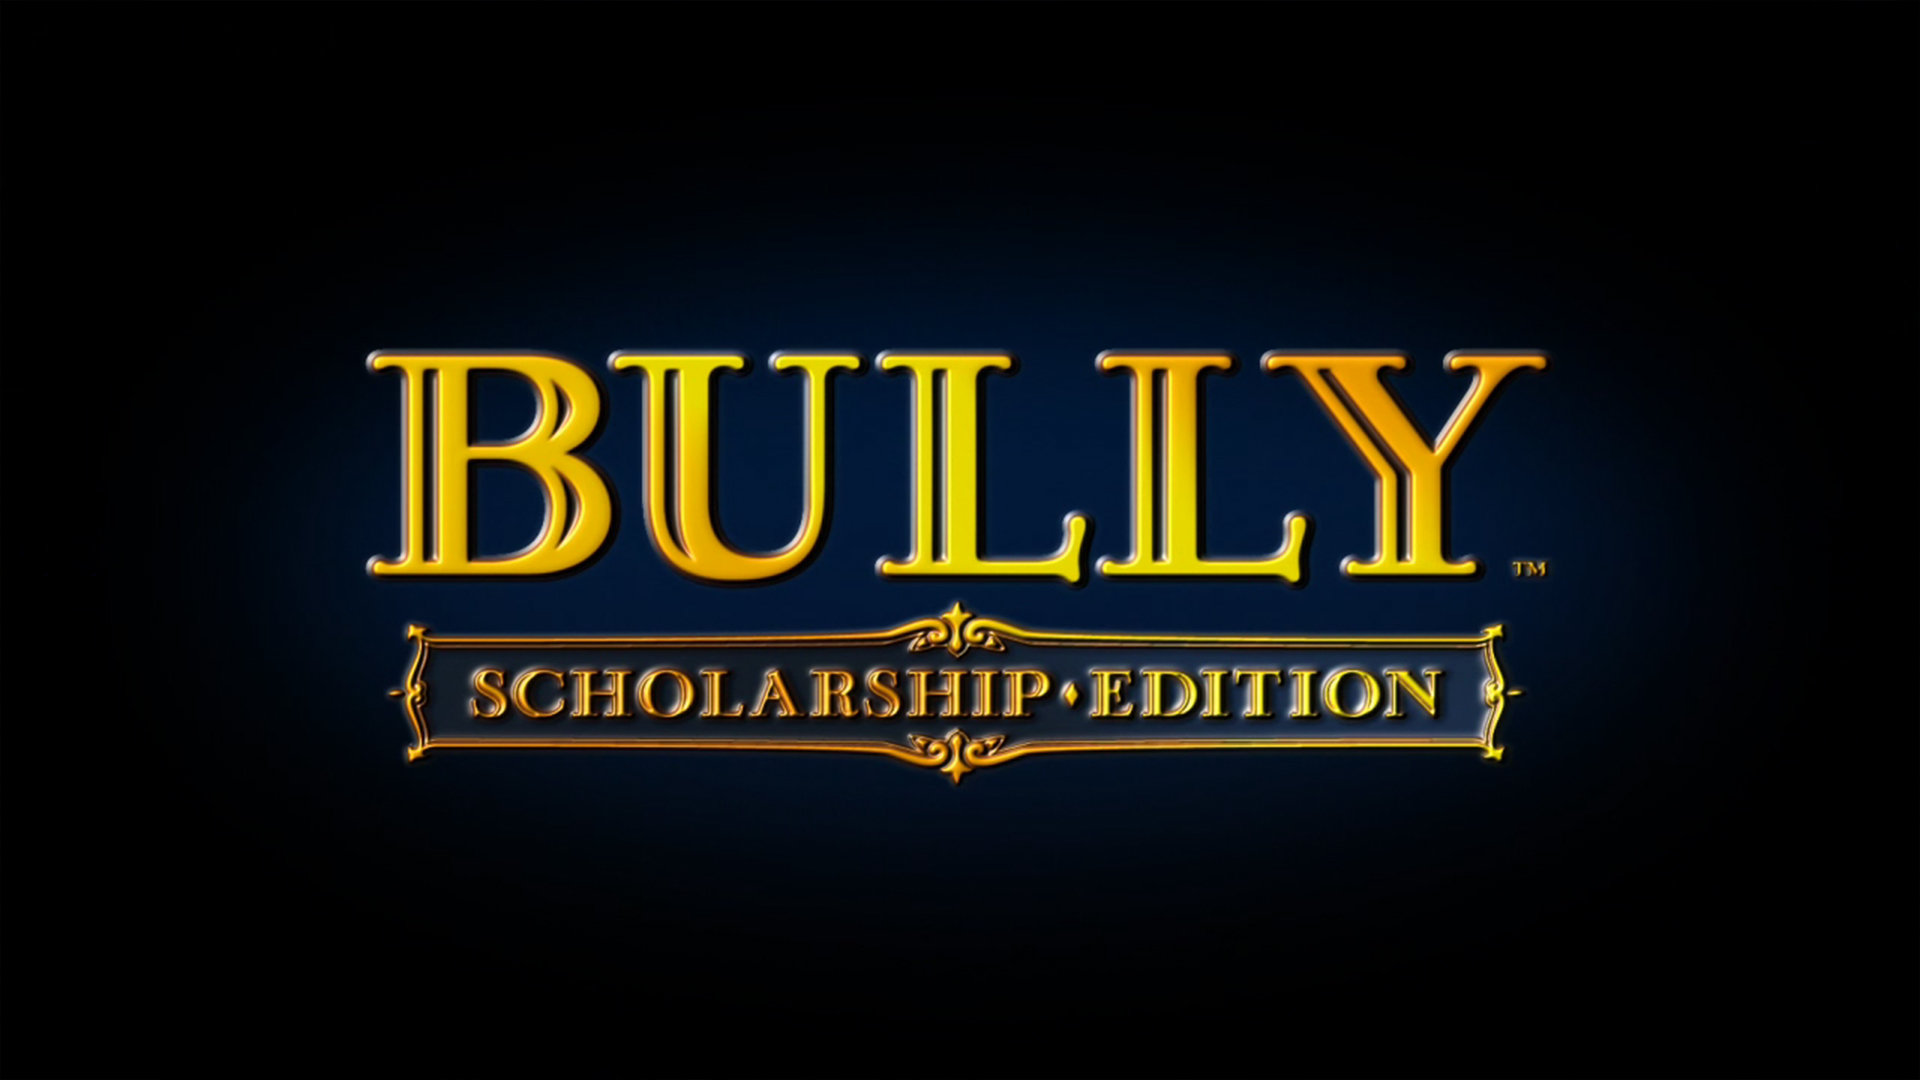 Download full hd 1920x1080 Bully PC background ID:64142 for free